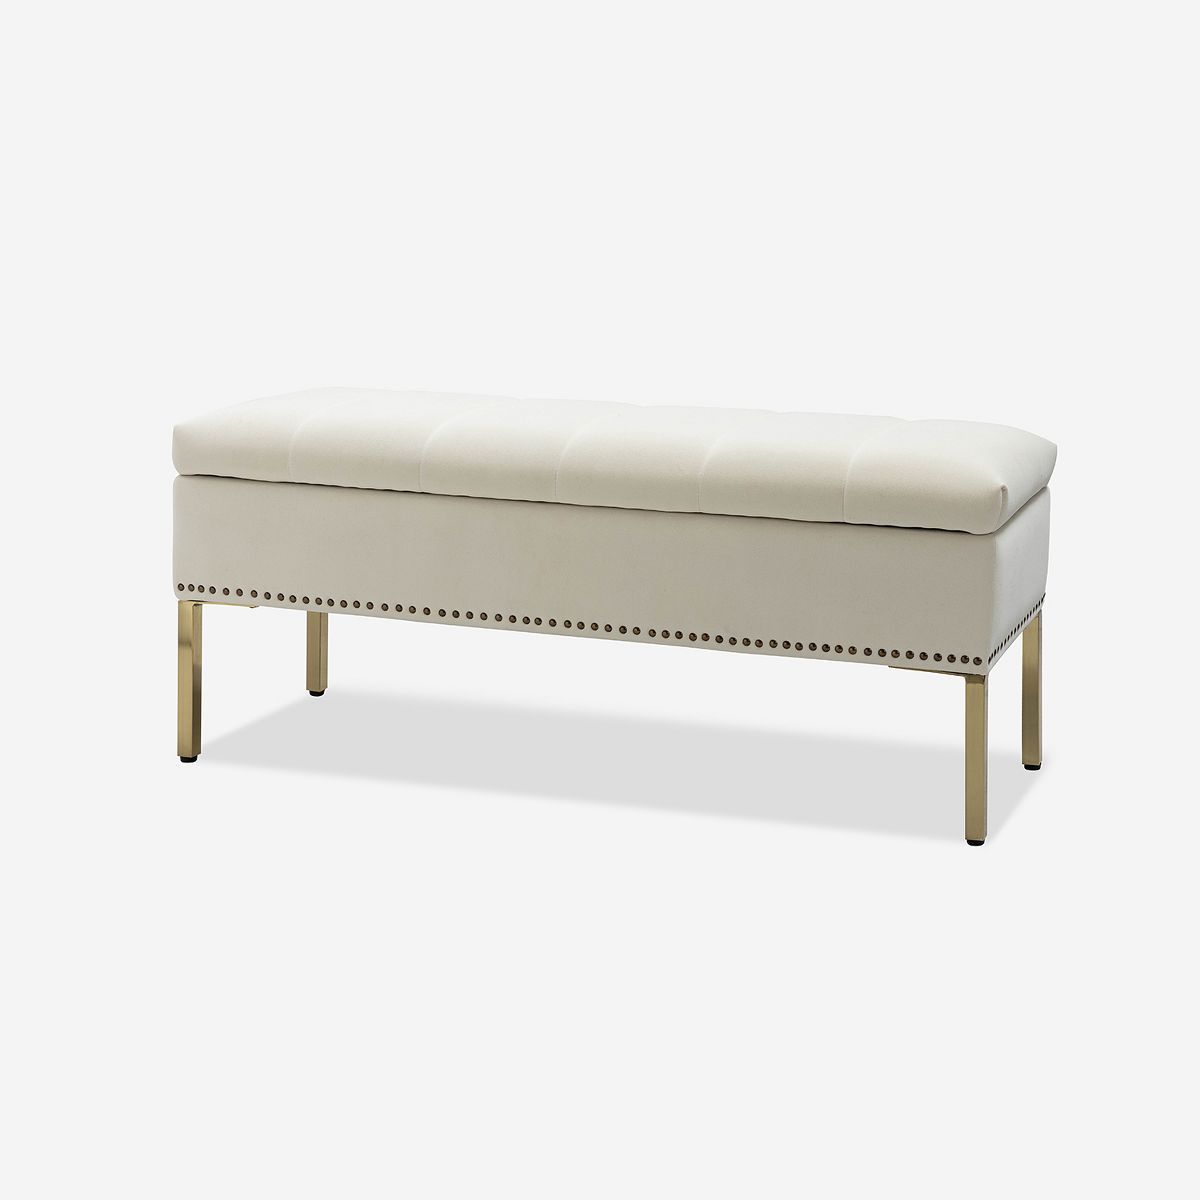 Eduard Tufted Upholstered Contemporary Velvet Flip-Top Storage Bench with Nailhead Trim |HULALA H... | Target